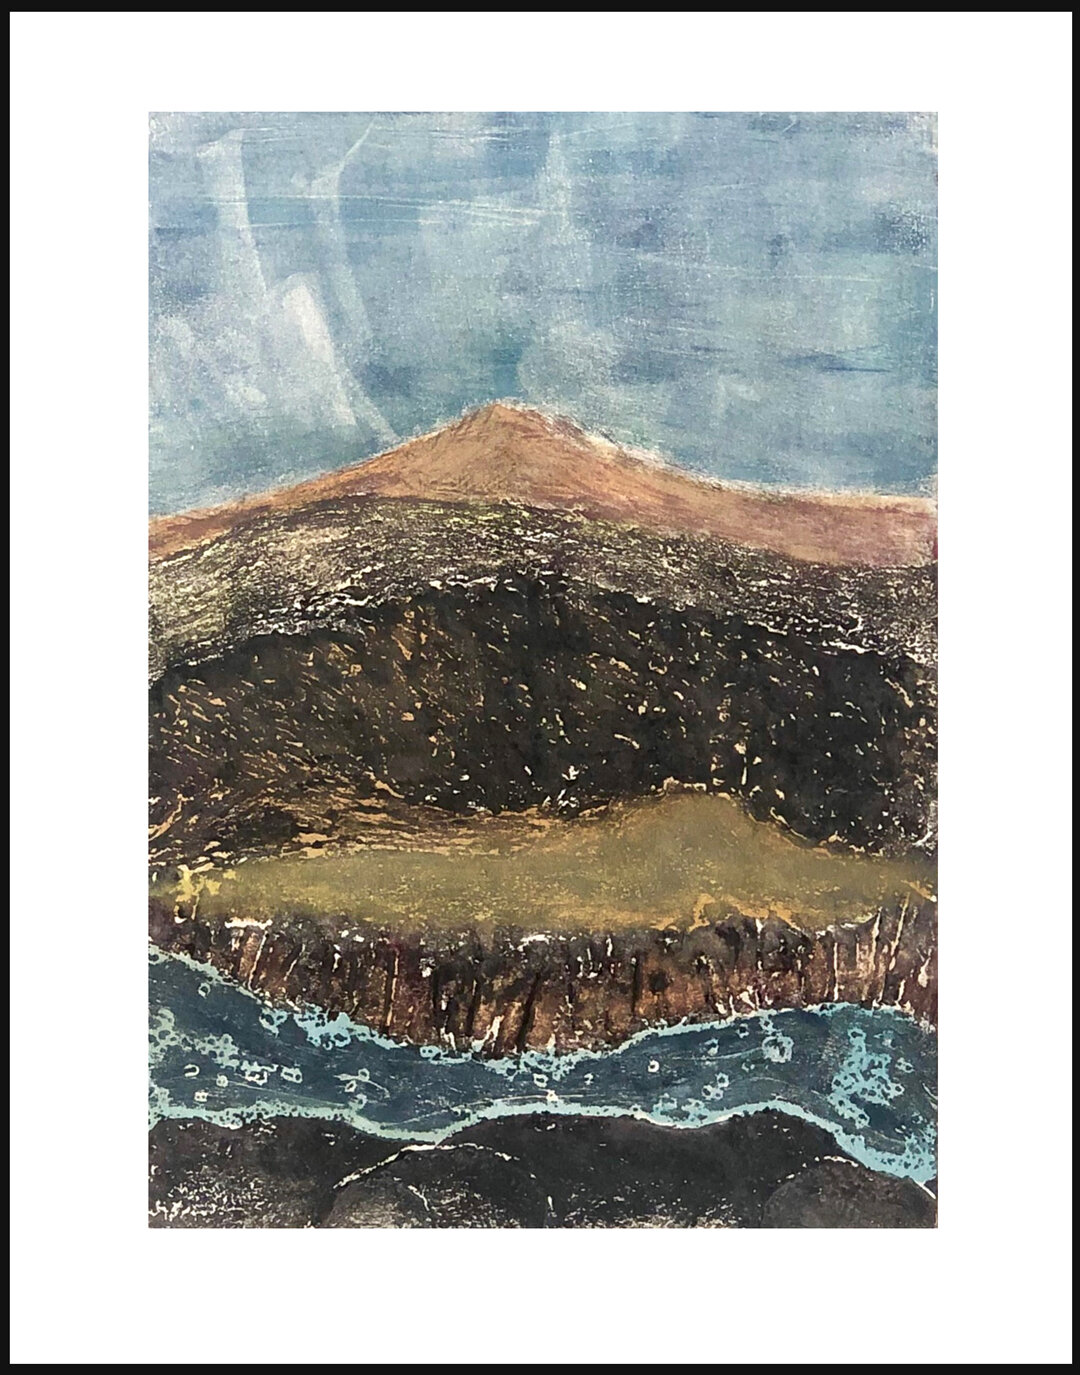    “River Below”    Collagraph/Monoprint, 11 x 15 inches  $110  Tumalo Art Gallery, Bend  